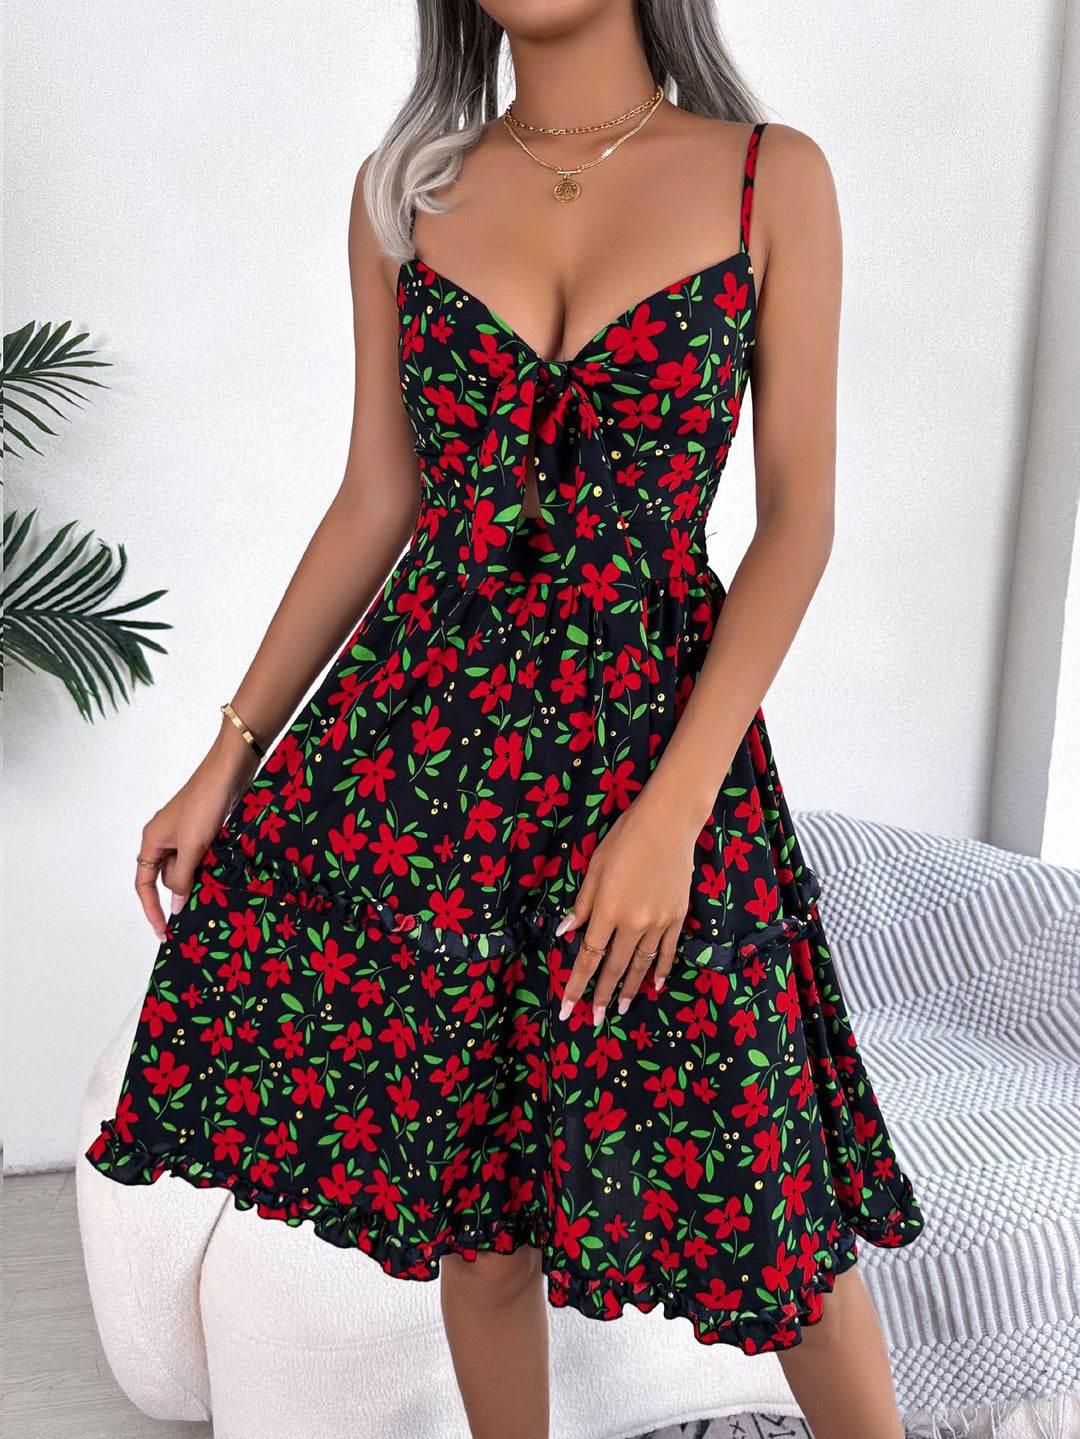 Spring Summer Casual Floral Bow Ruffle Sleeveless Dress Women Clothing